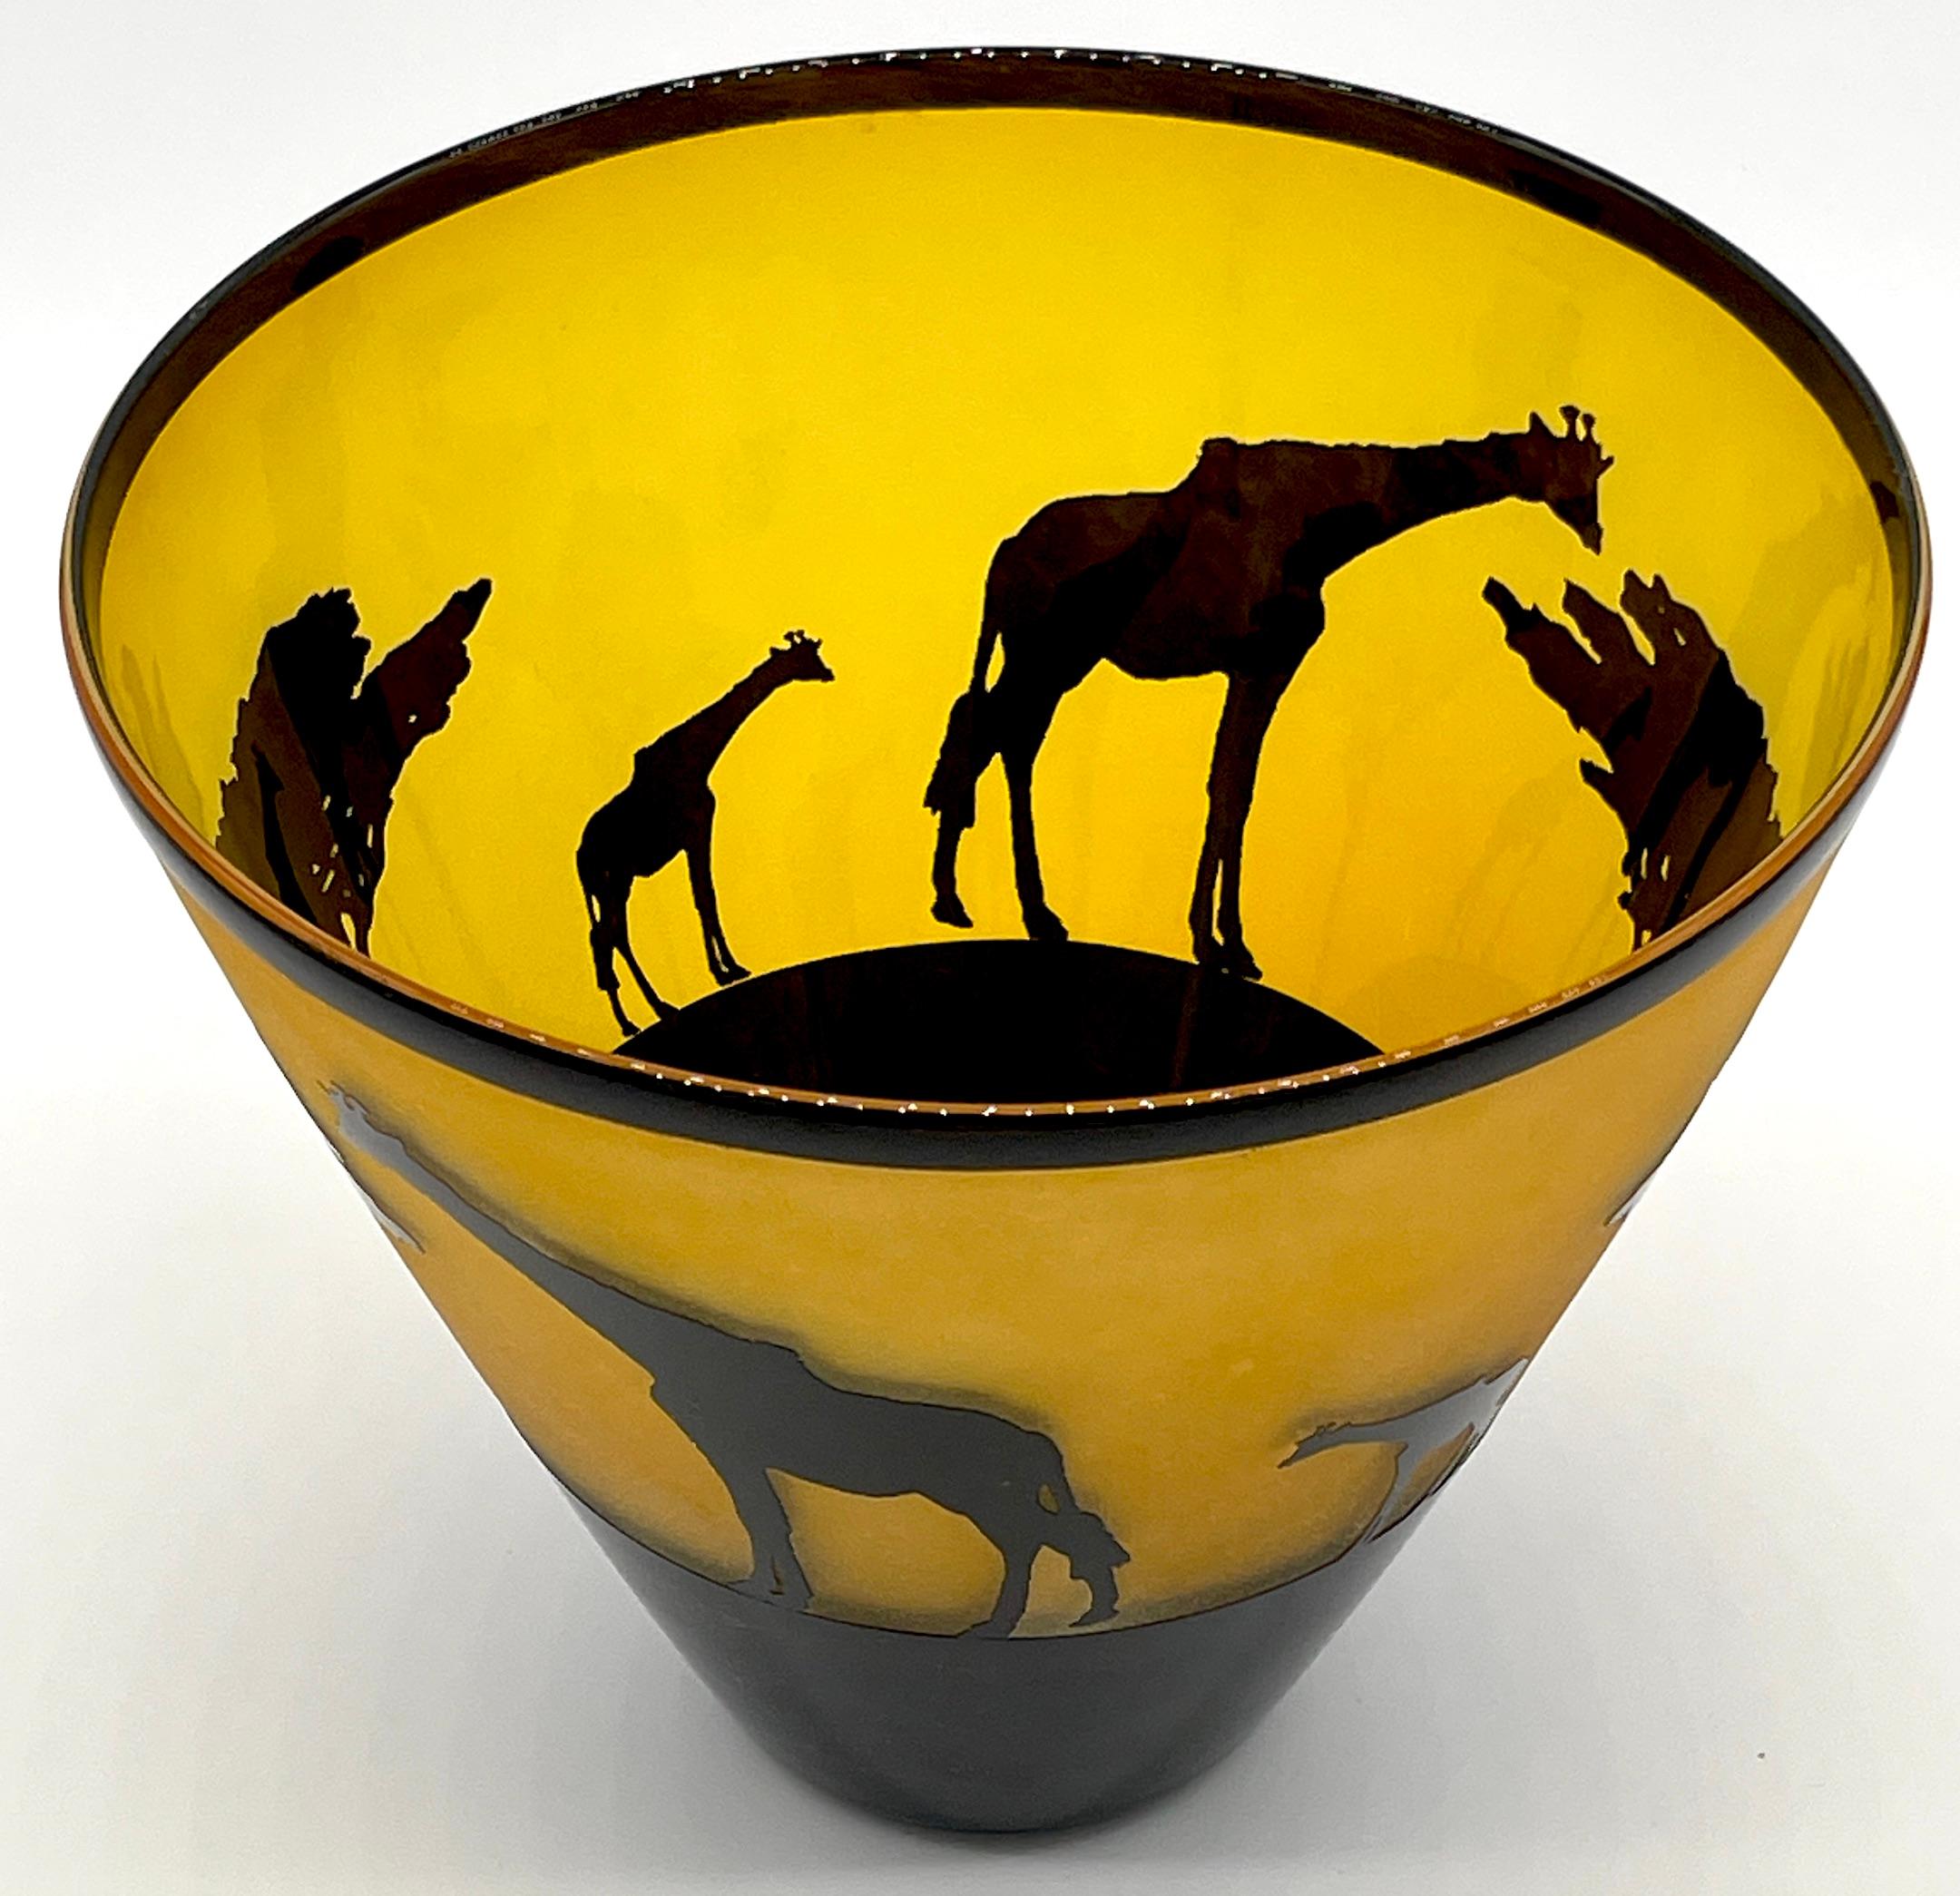 African Landscape Cameo Glass Vase by Steven Correia, 1986 Edition of #168/500 2